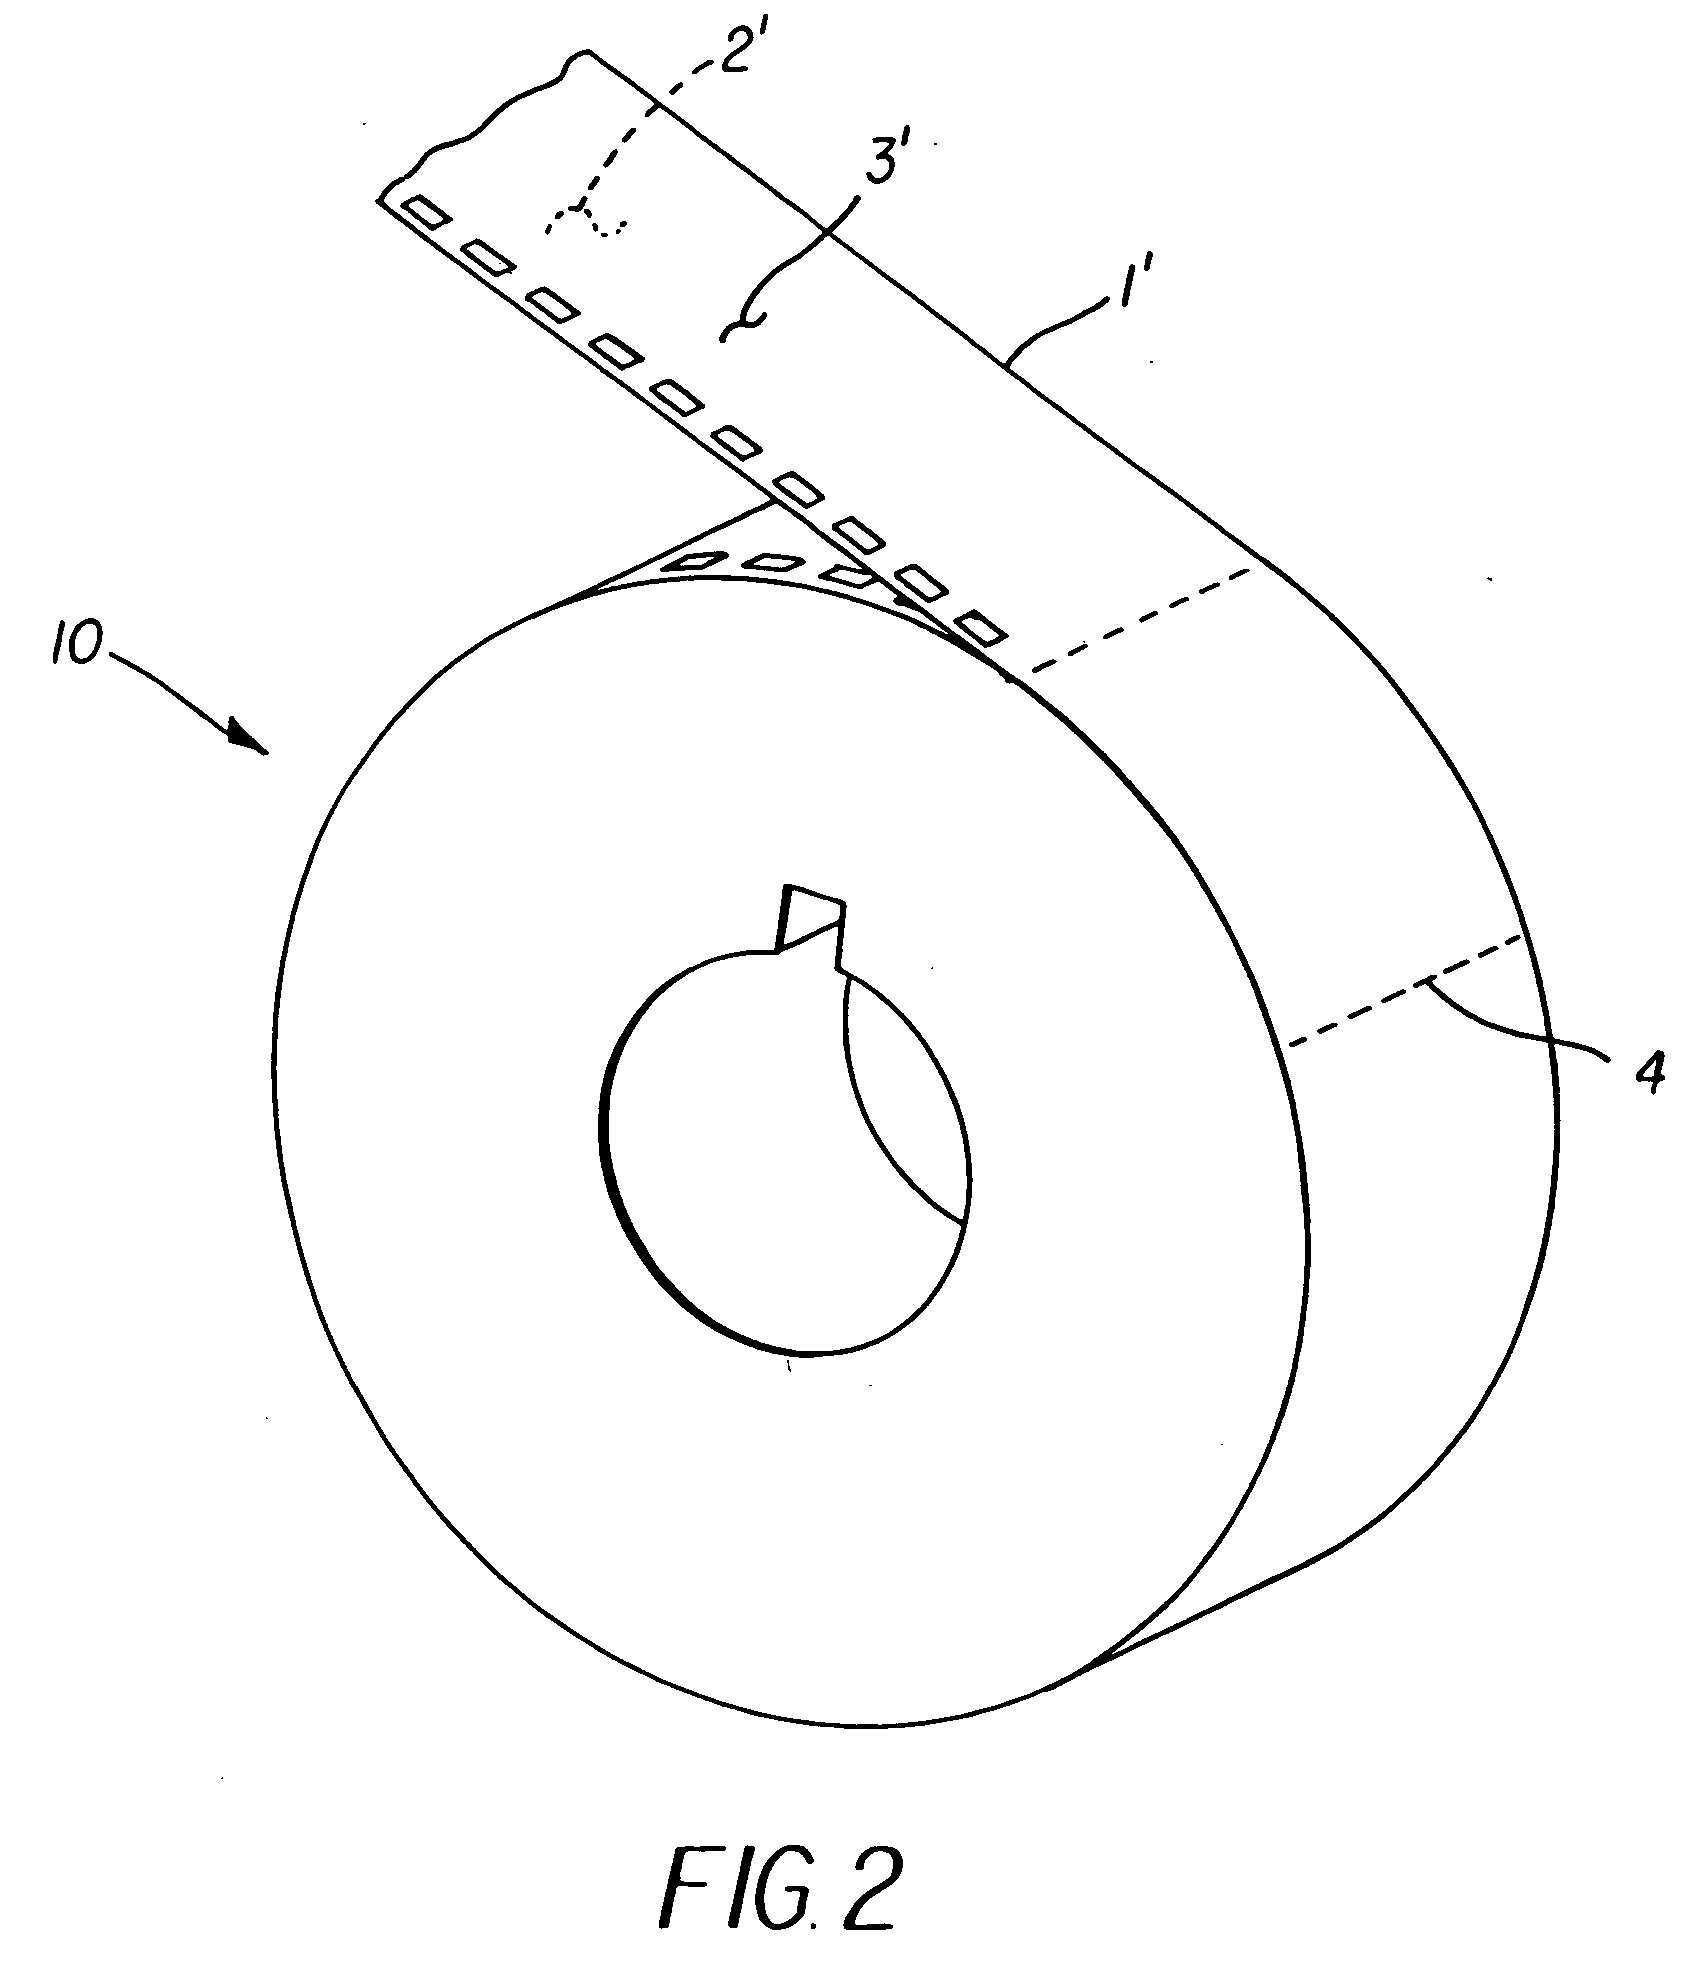 Method of manufacturing a web-winding device